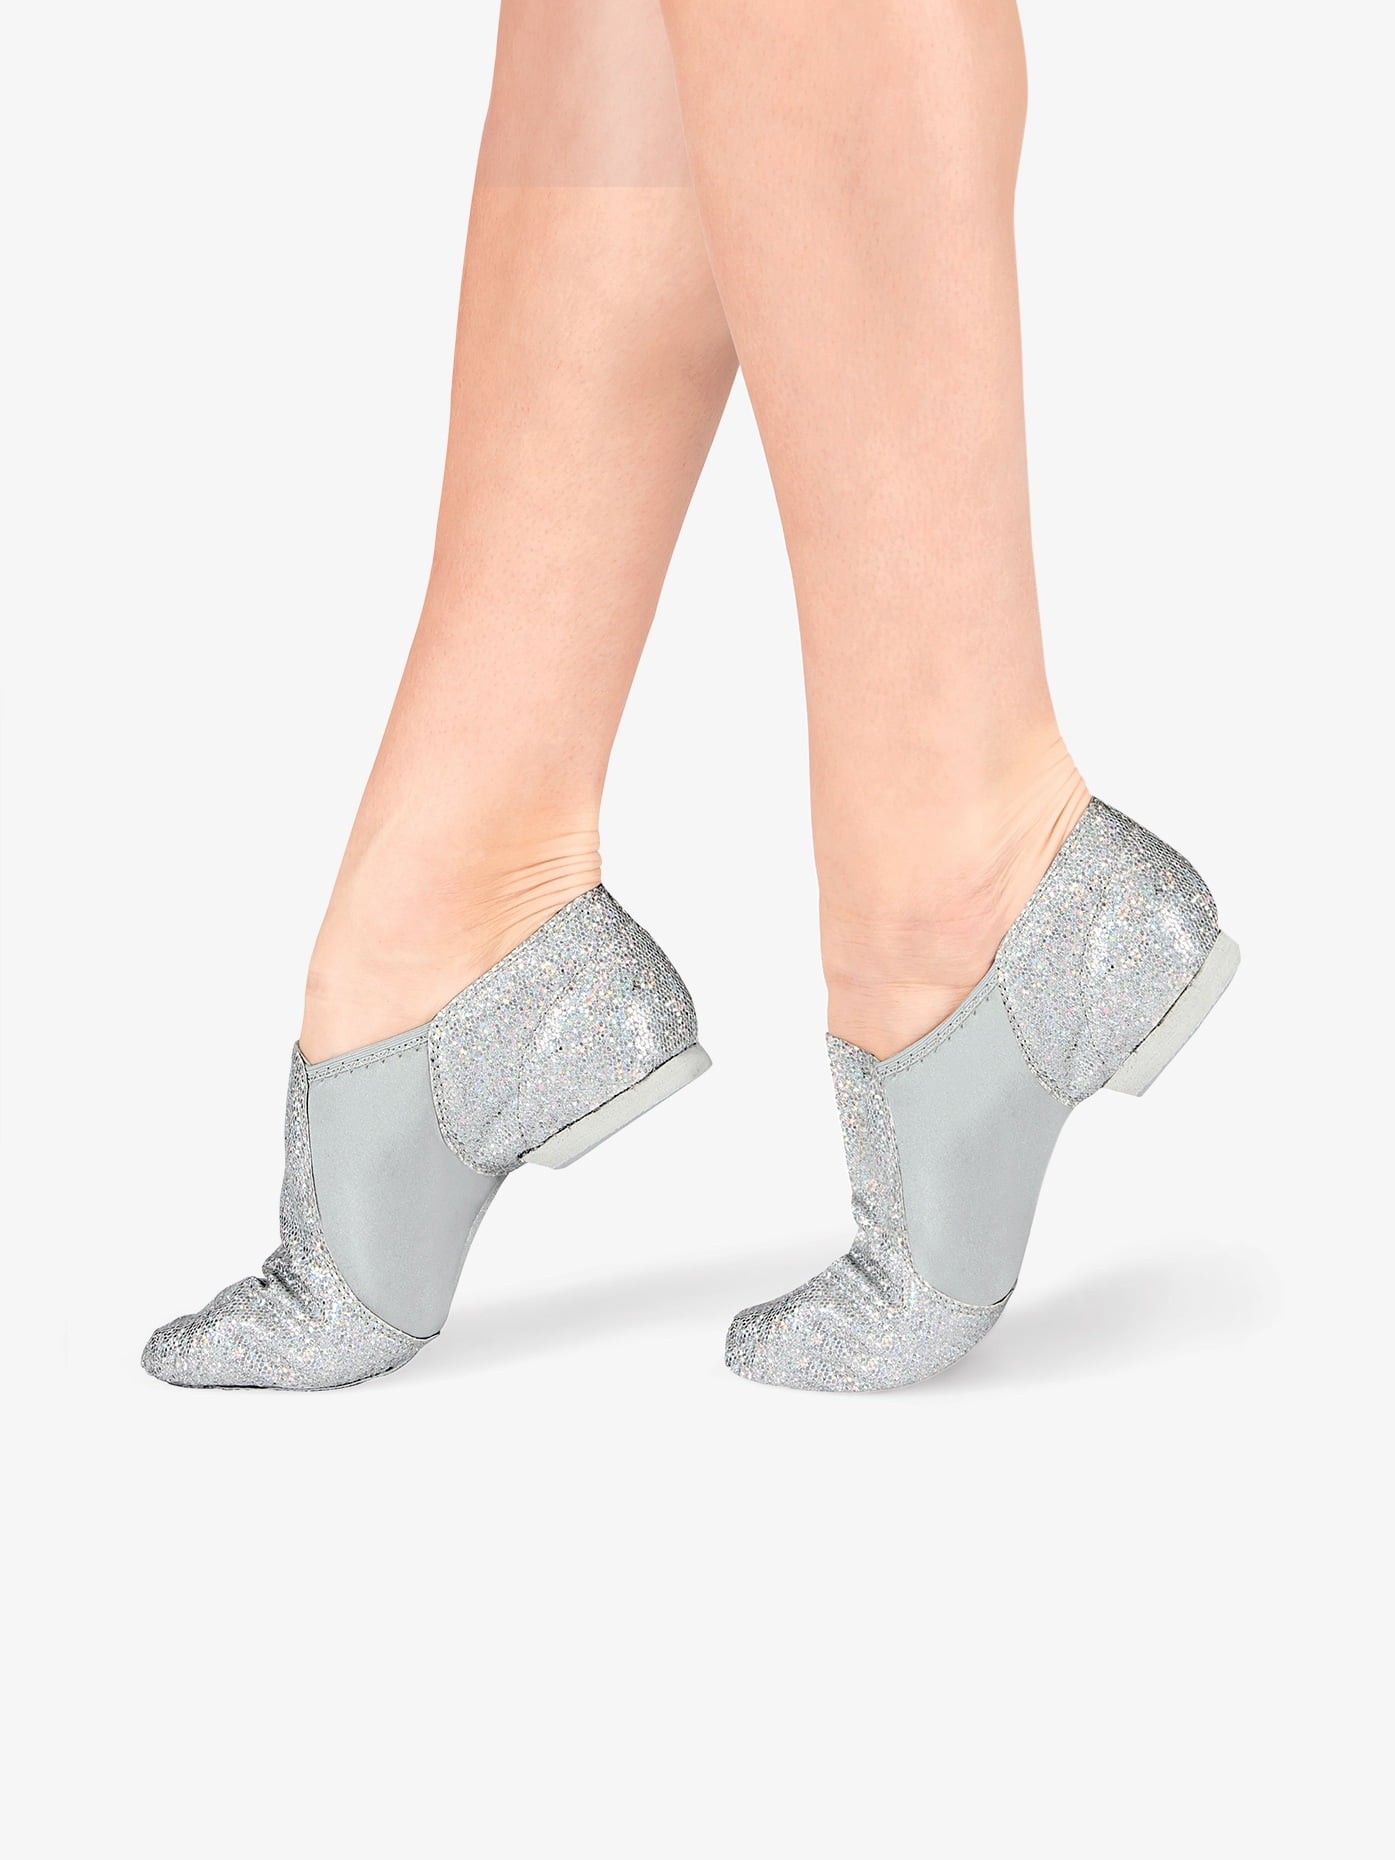 DOUBLEP - Adult Glitter Jazz Shoes 